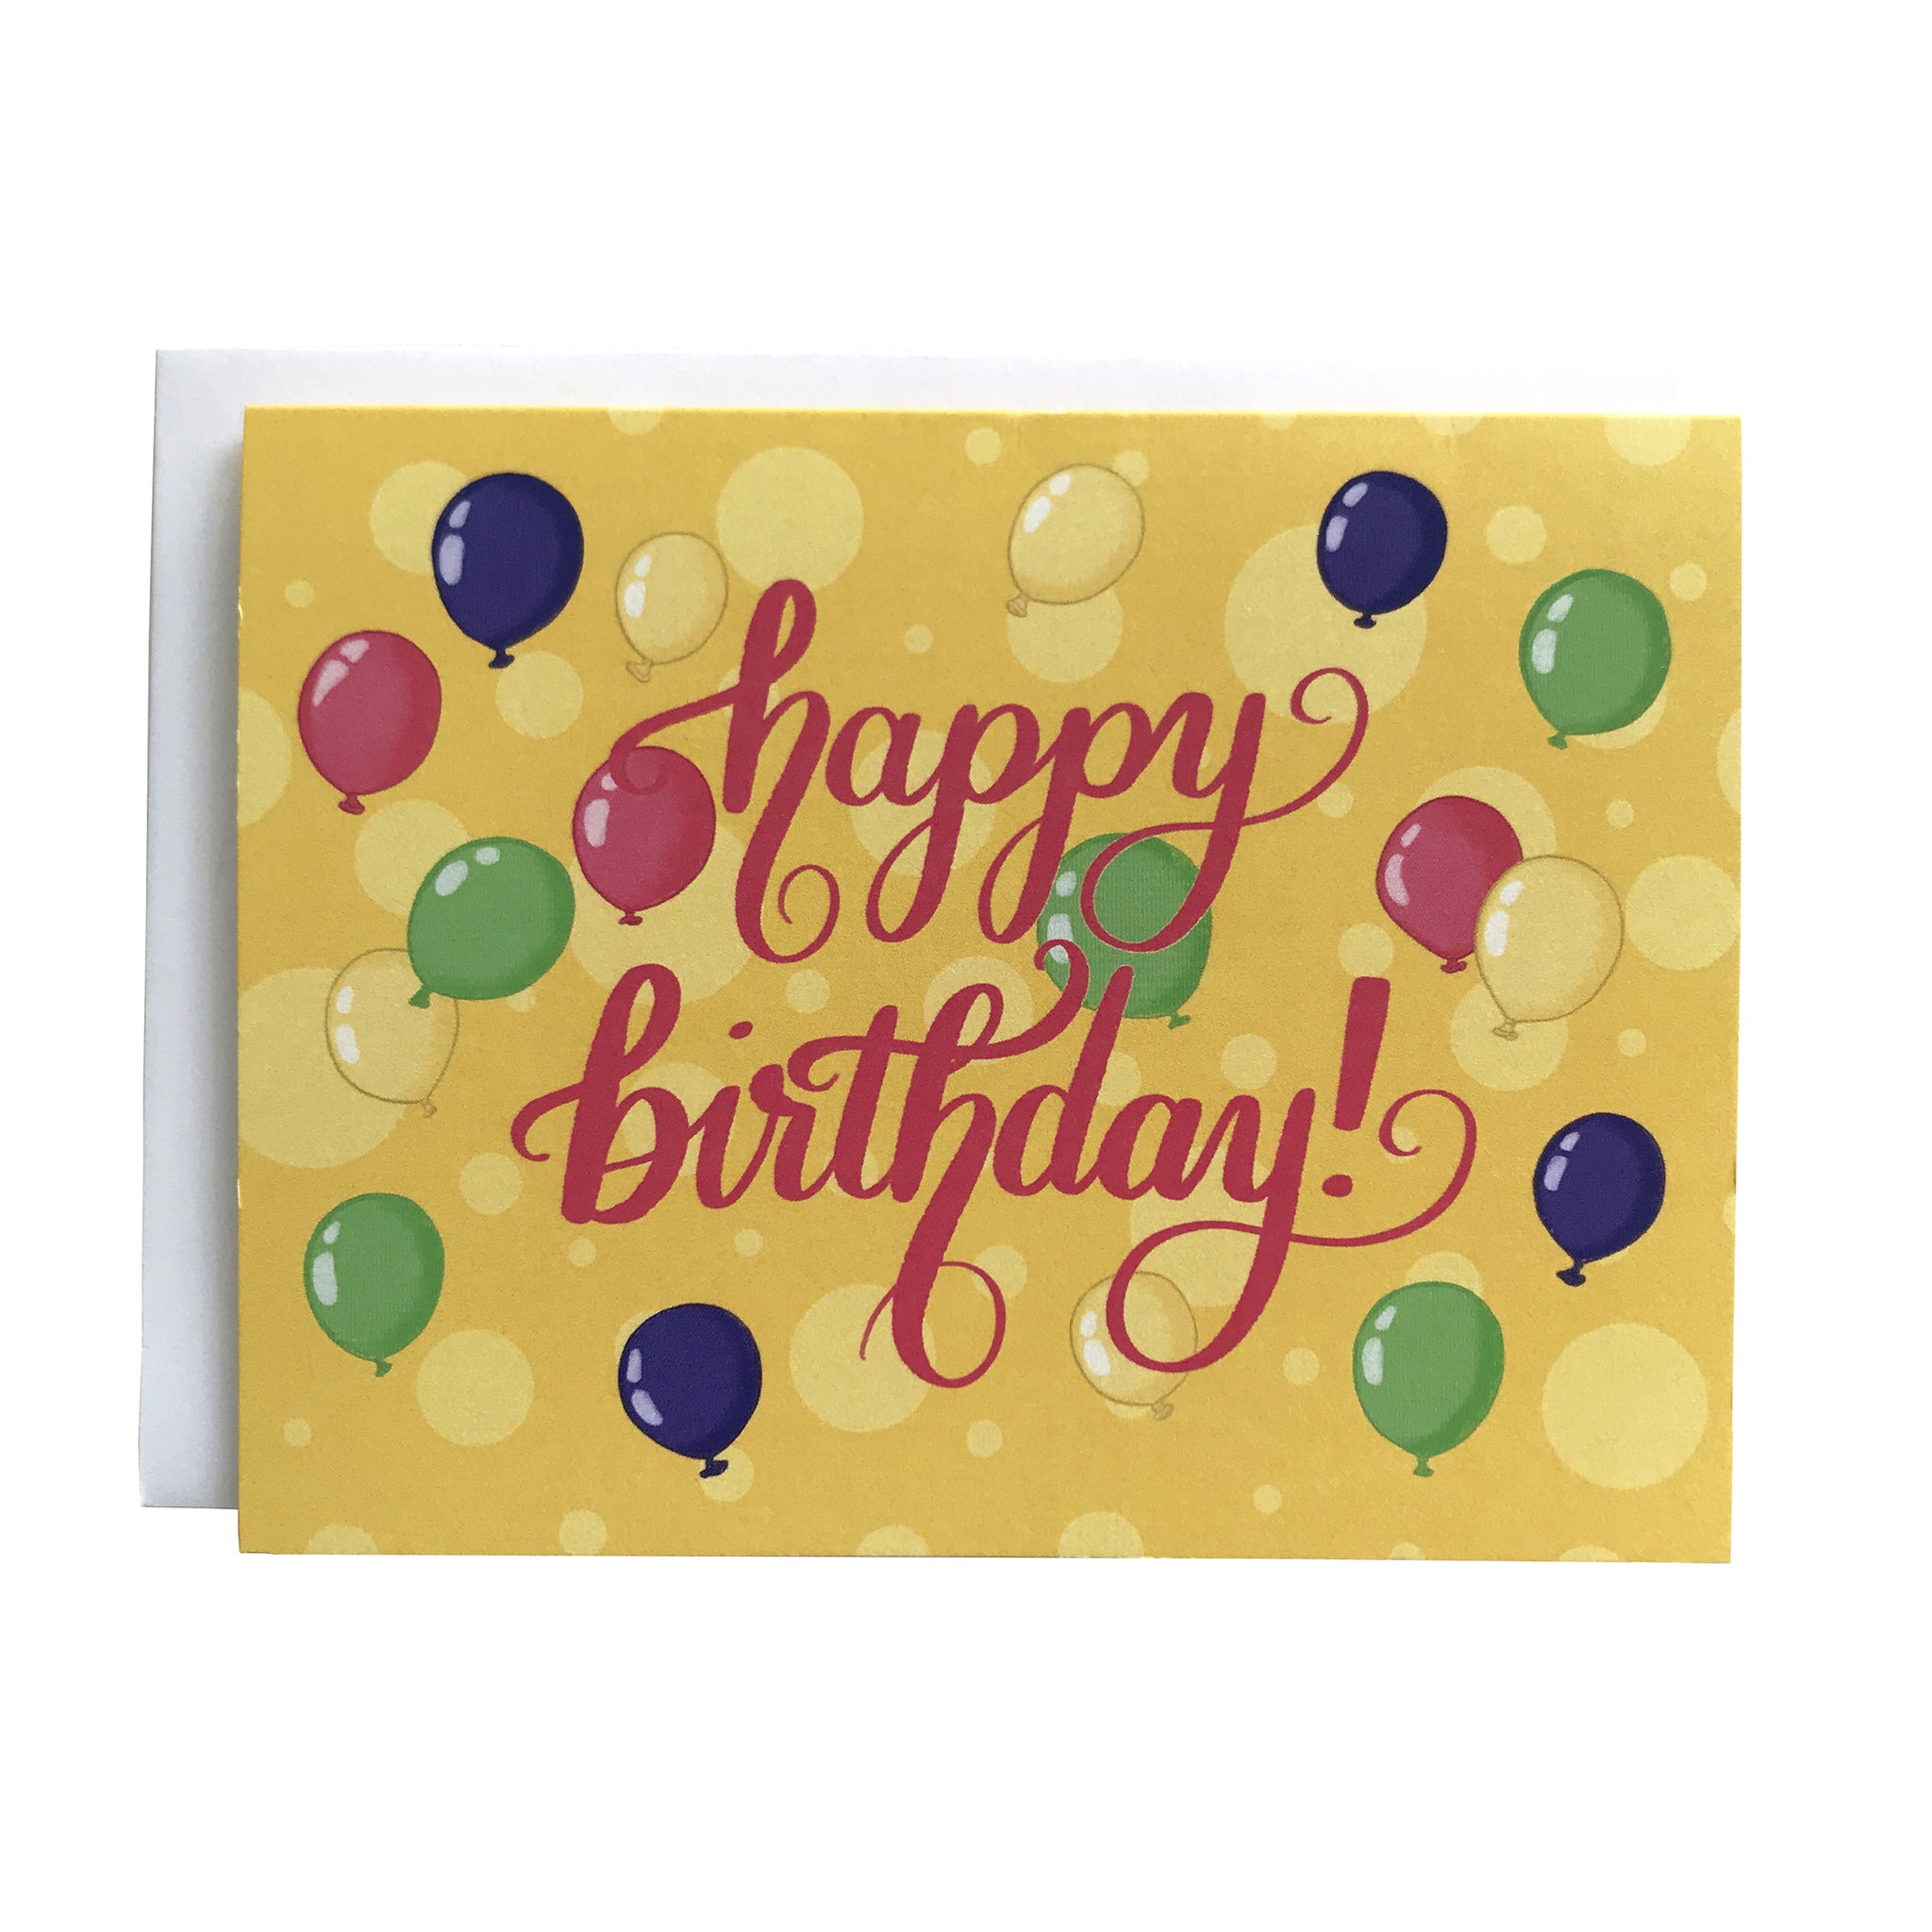 A yellow greeting card is covered with yellow dots and illustrations of pink, purple, yellow and green balloons. On the card are the words "happy birthday" lettered in bright pink. The card sits against a white envelope on a white background.